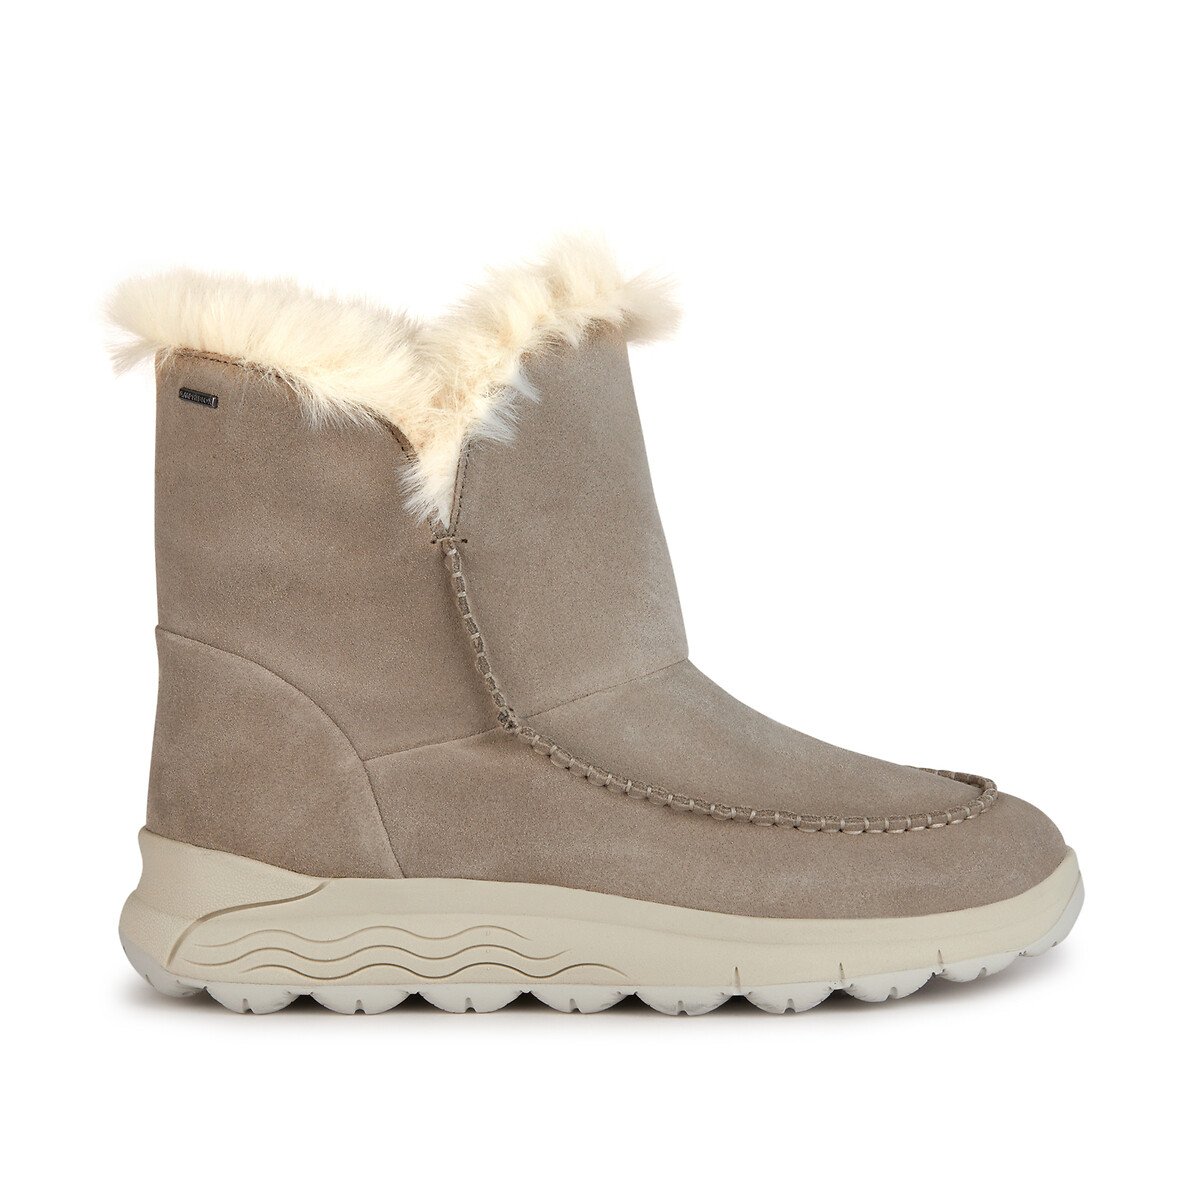 spherica breathable ankle boots in suede with faux fur